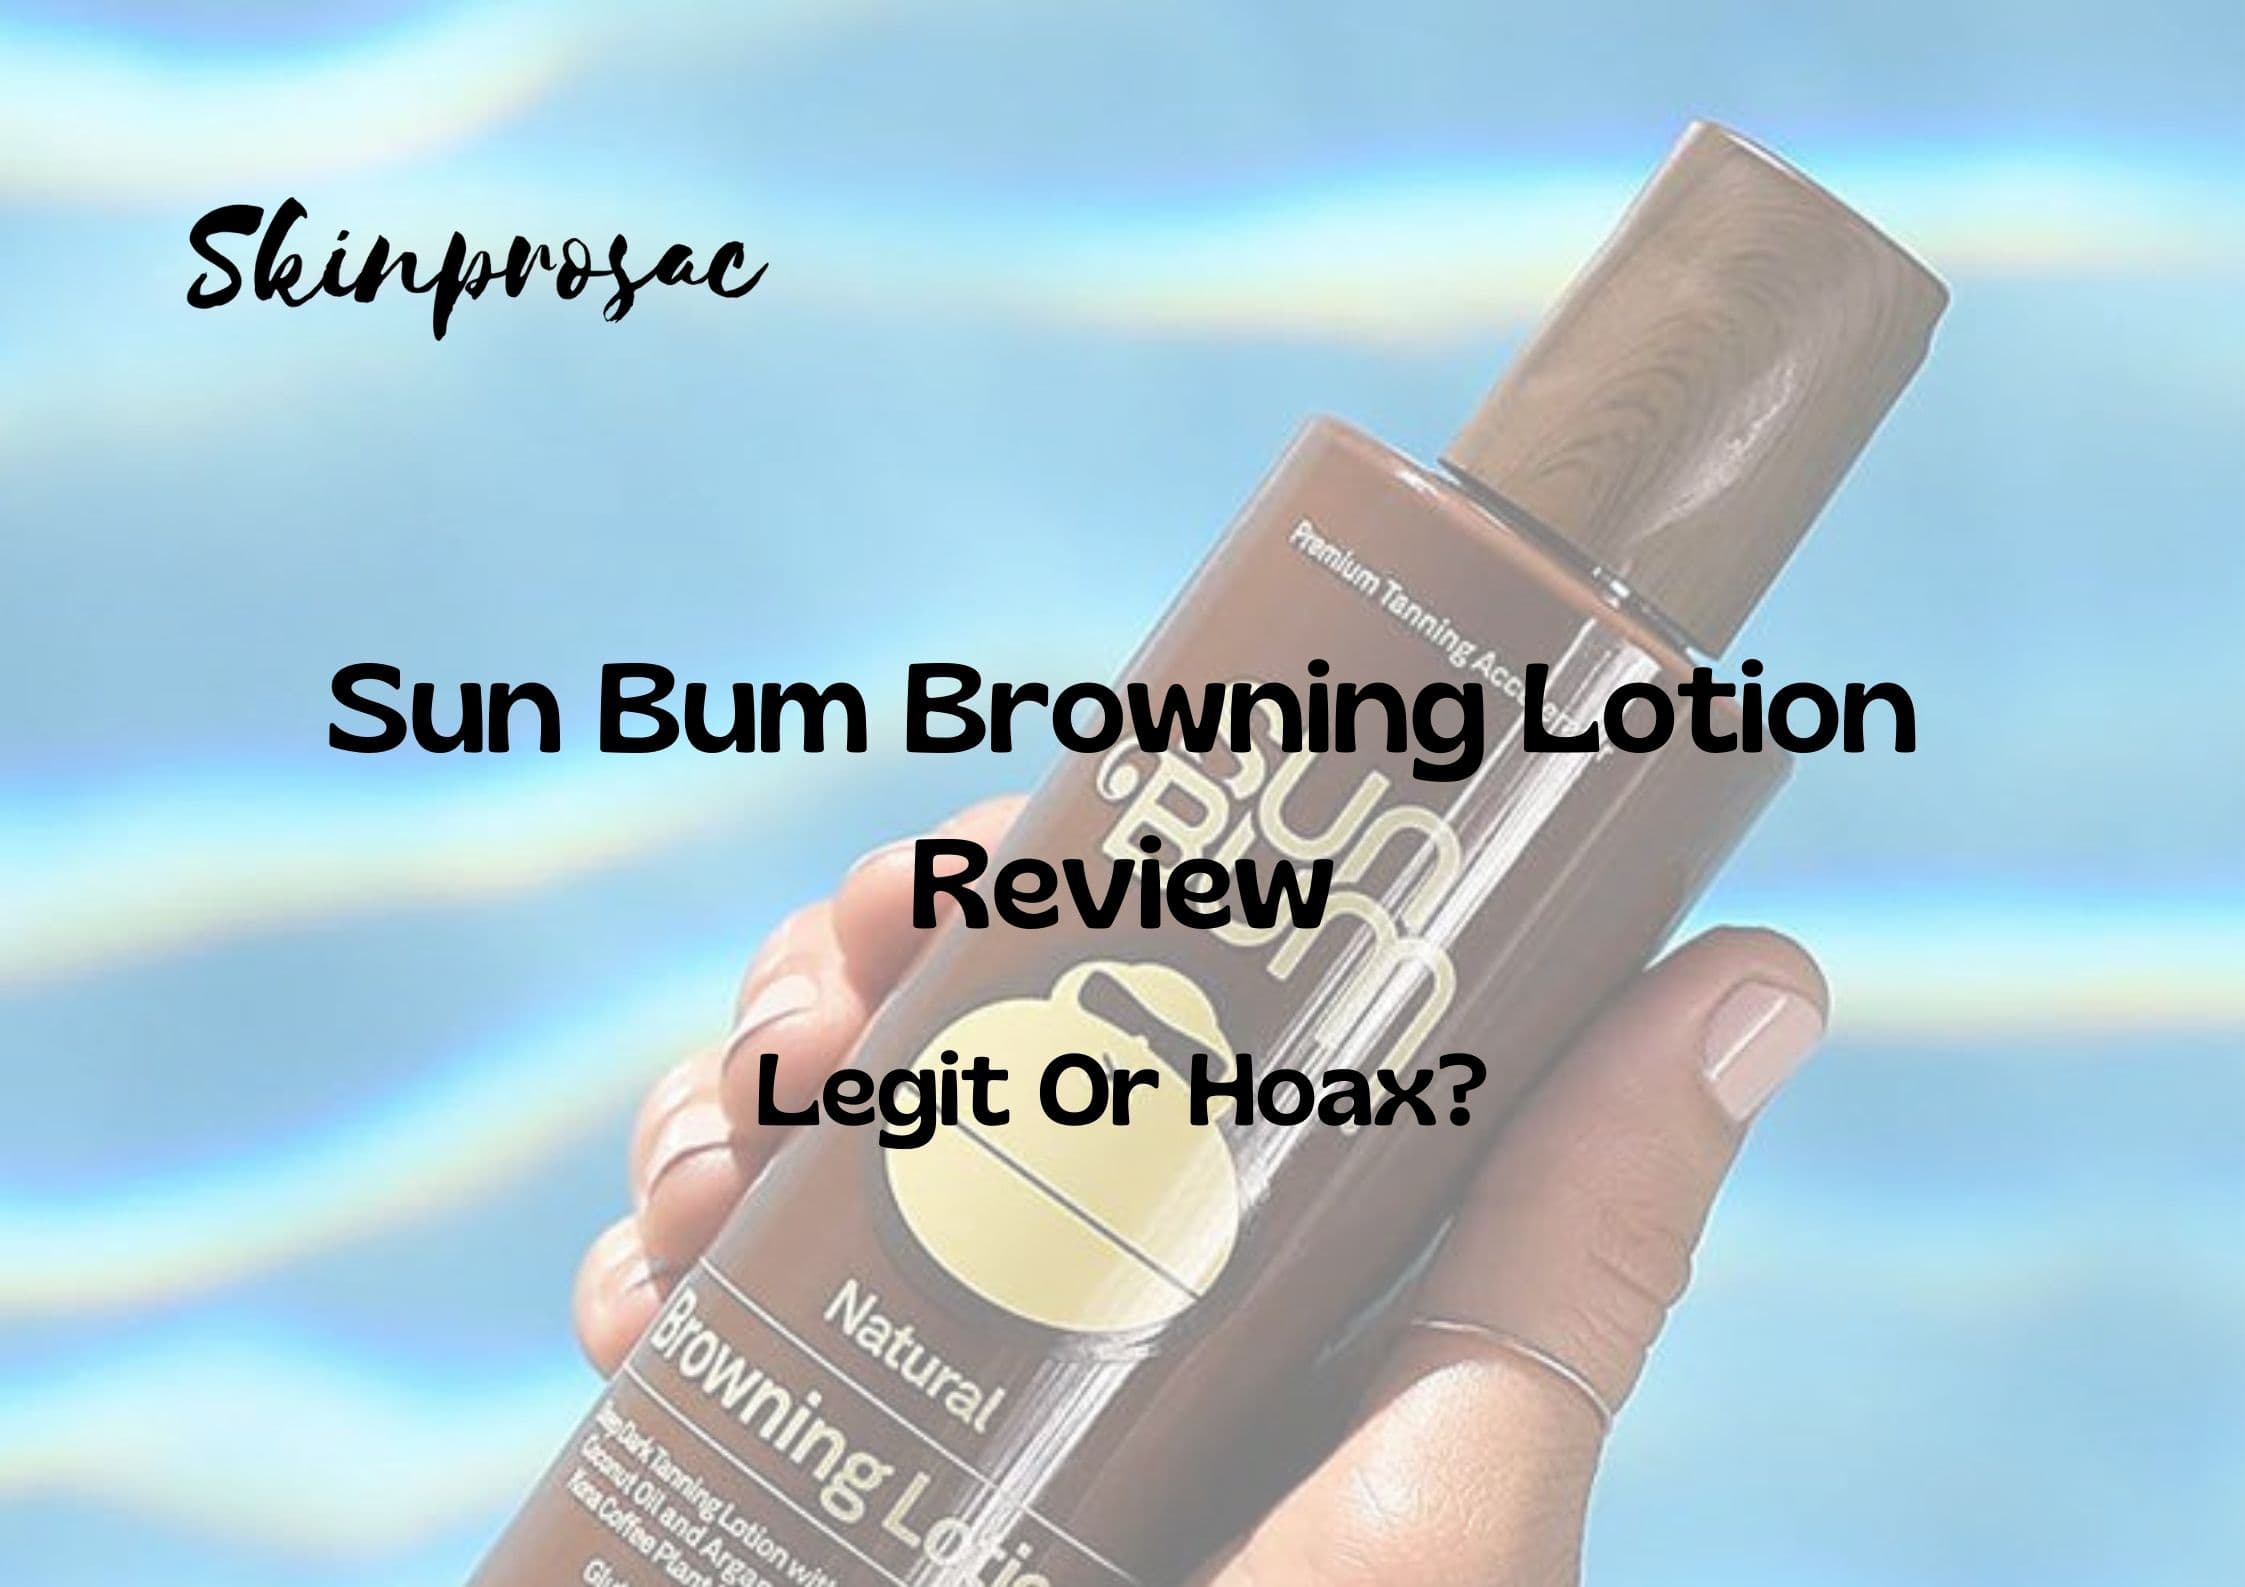 Sun Bum Browning Lotion Review